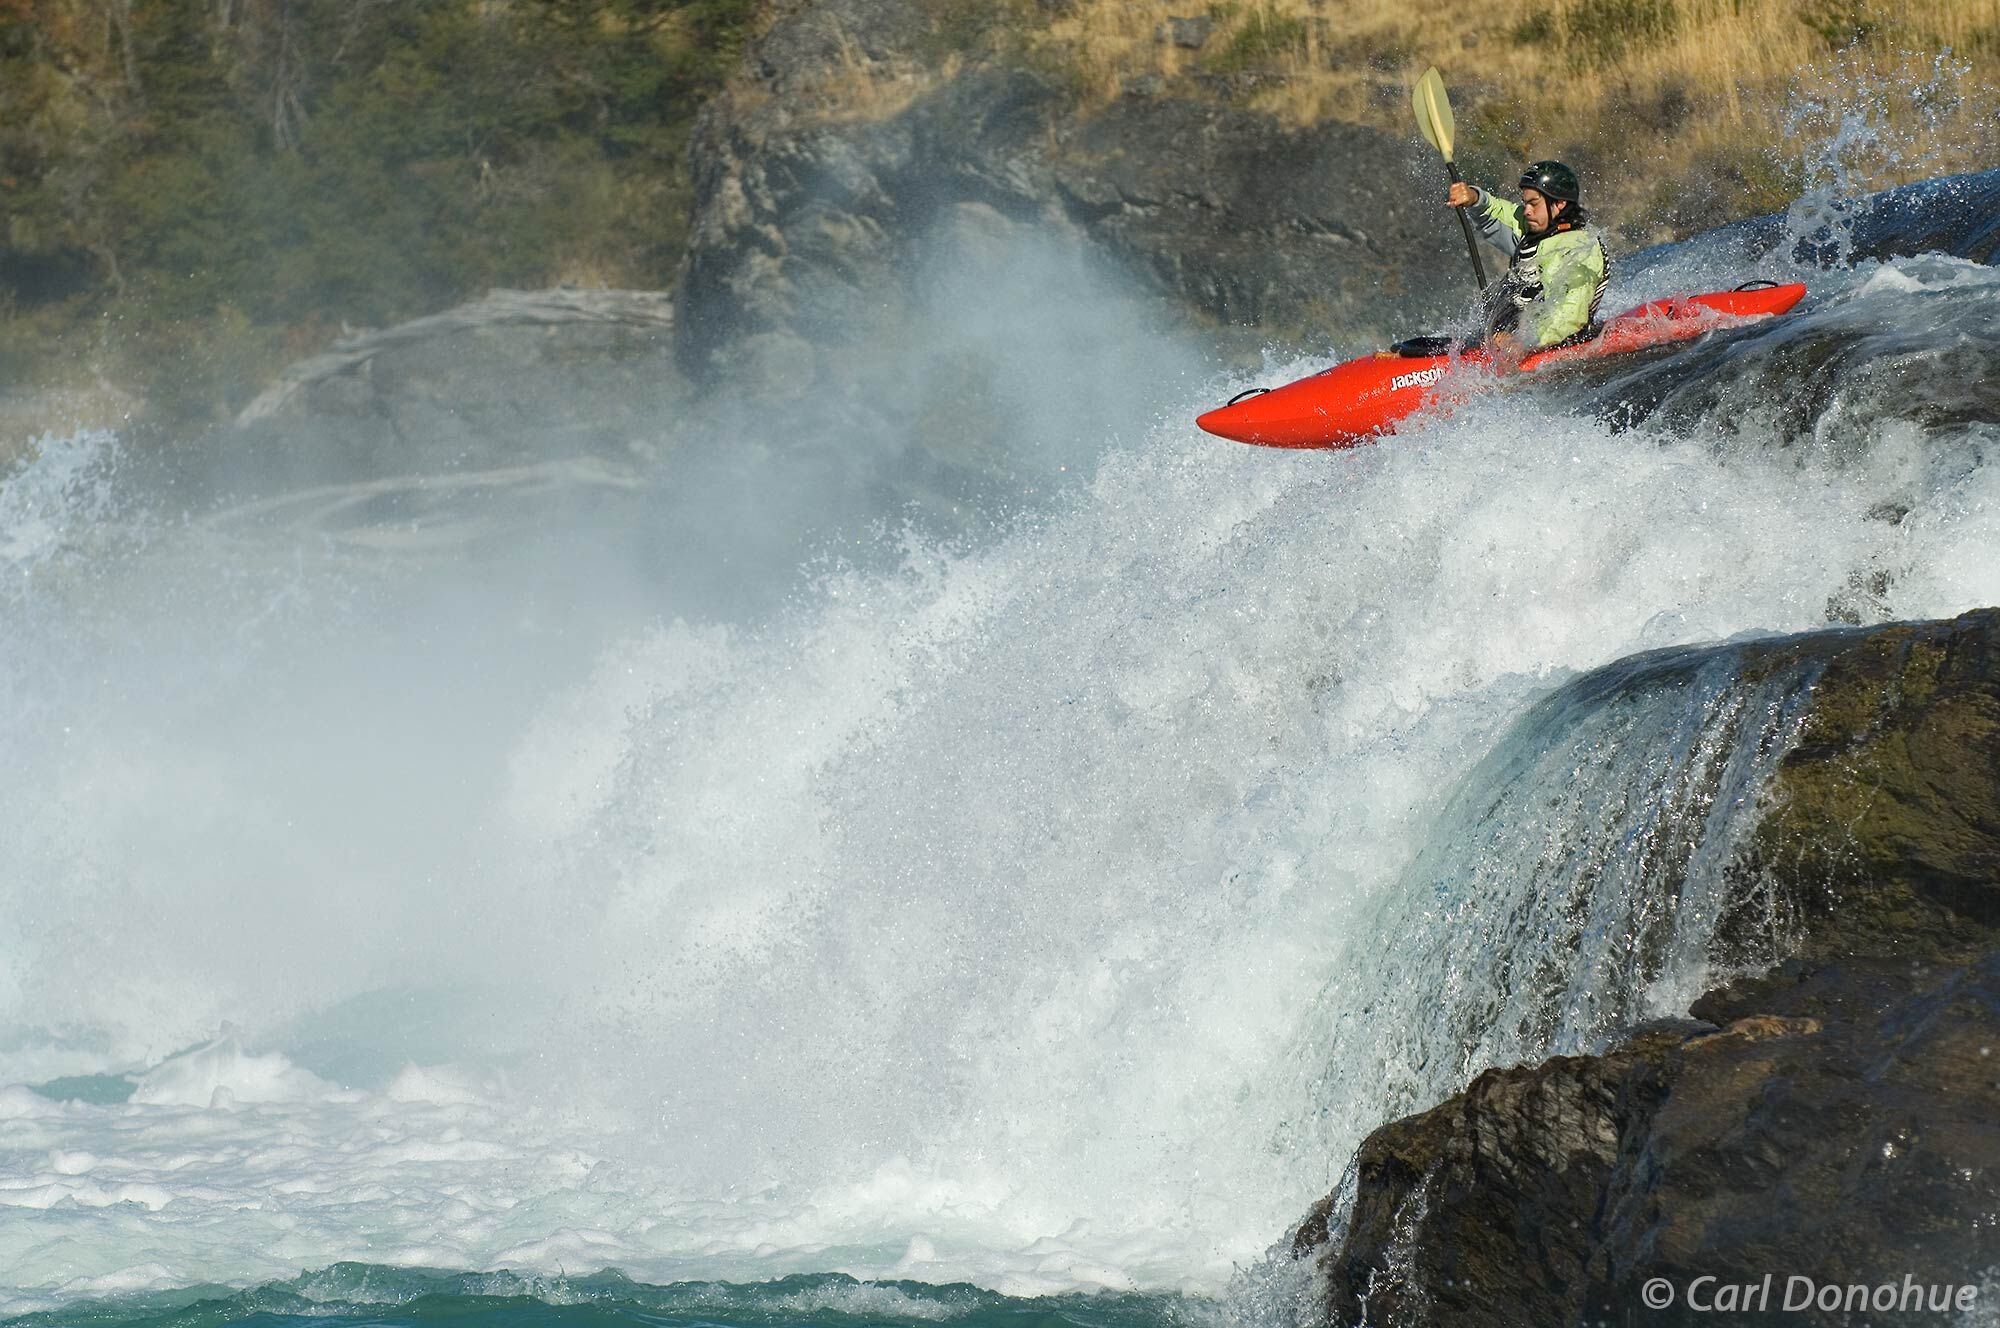 Whitewater kayaking at its best. The Rio Baker, or Baker River, in southern Patagonia, Chile, offers some of the best whitewater...